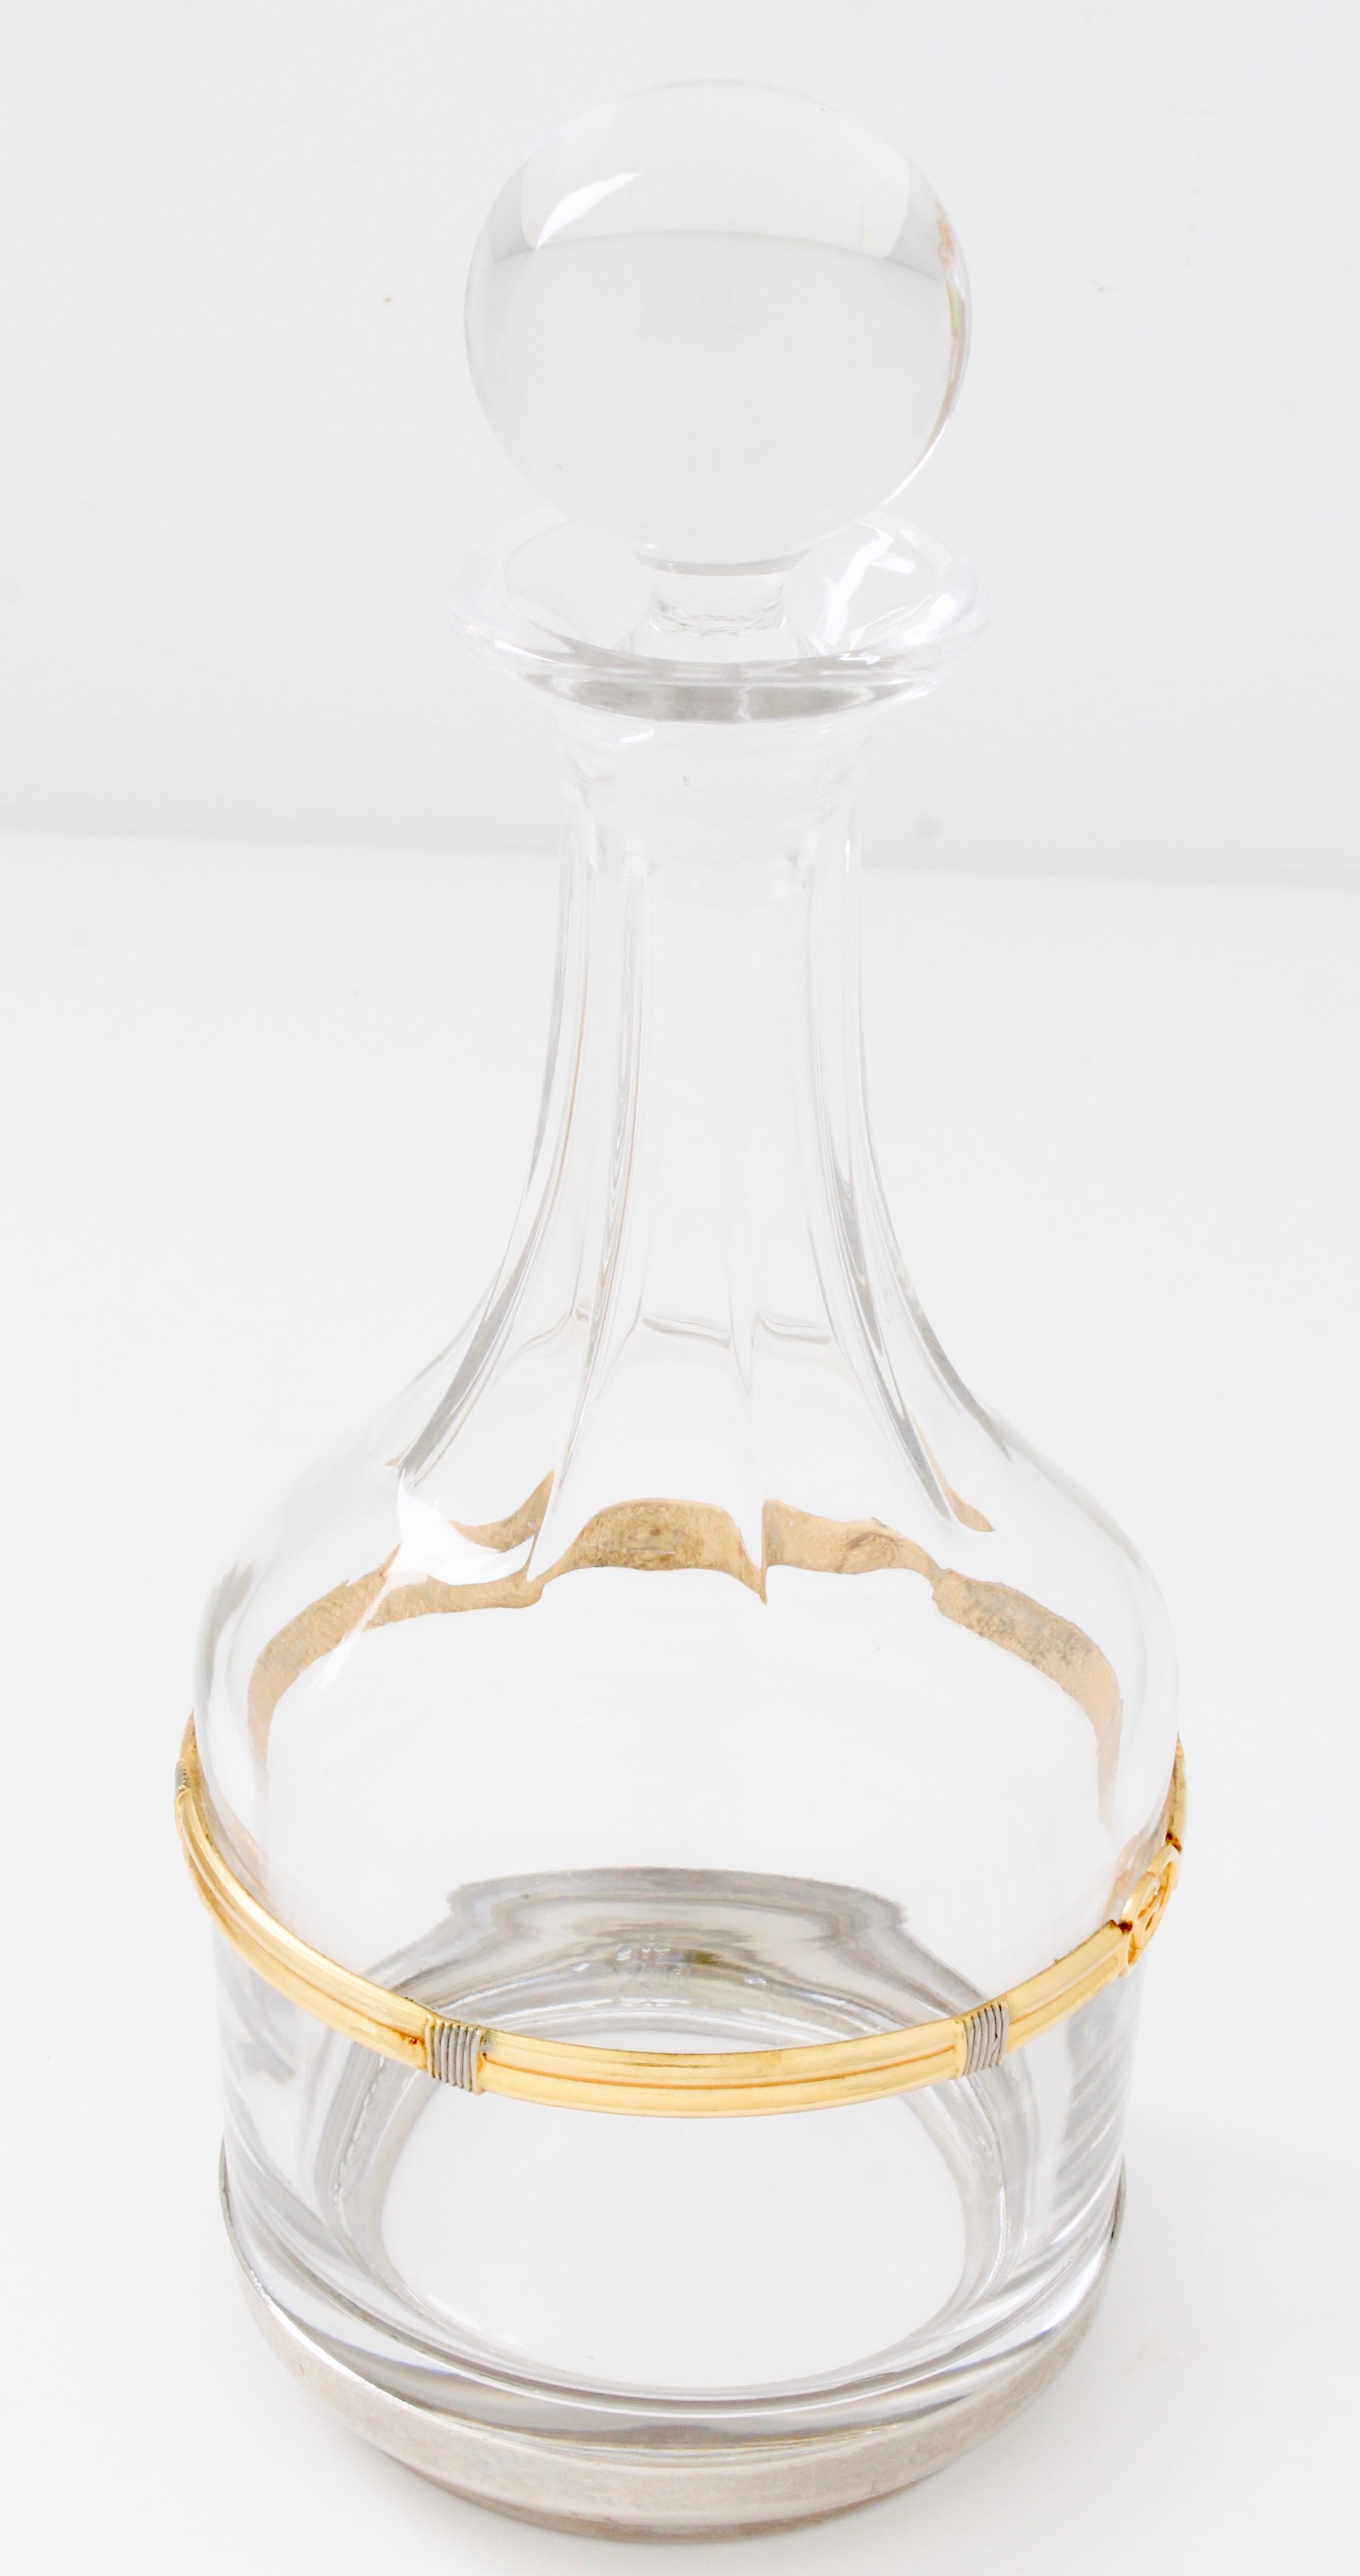 Entertain in high style with this rare crystal wine decanter from Gucci, likely made in the 1970s.  It comes with its round crystal stopper and features a gold and silver metal rope motif band with GG logo at the center, and a silver metal base. 